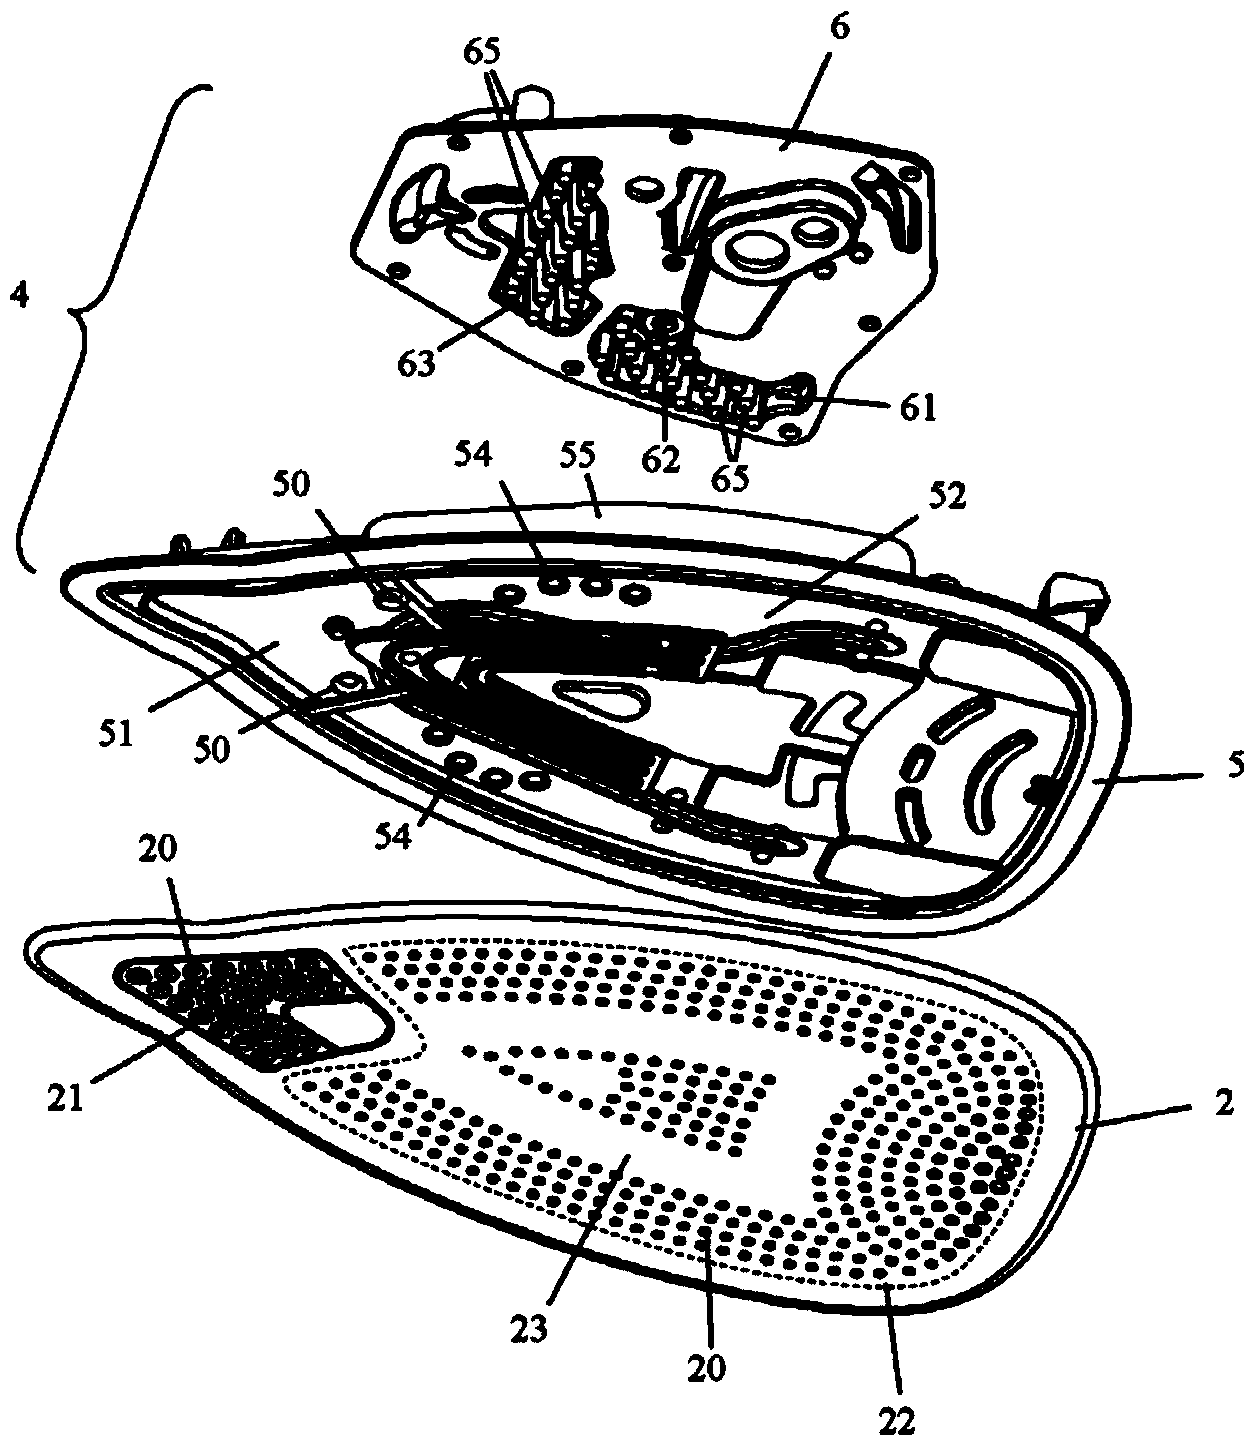 Steam ironing appliance comprising a pressurised steam generator and an iron